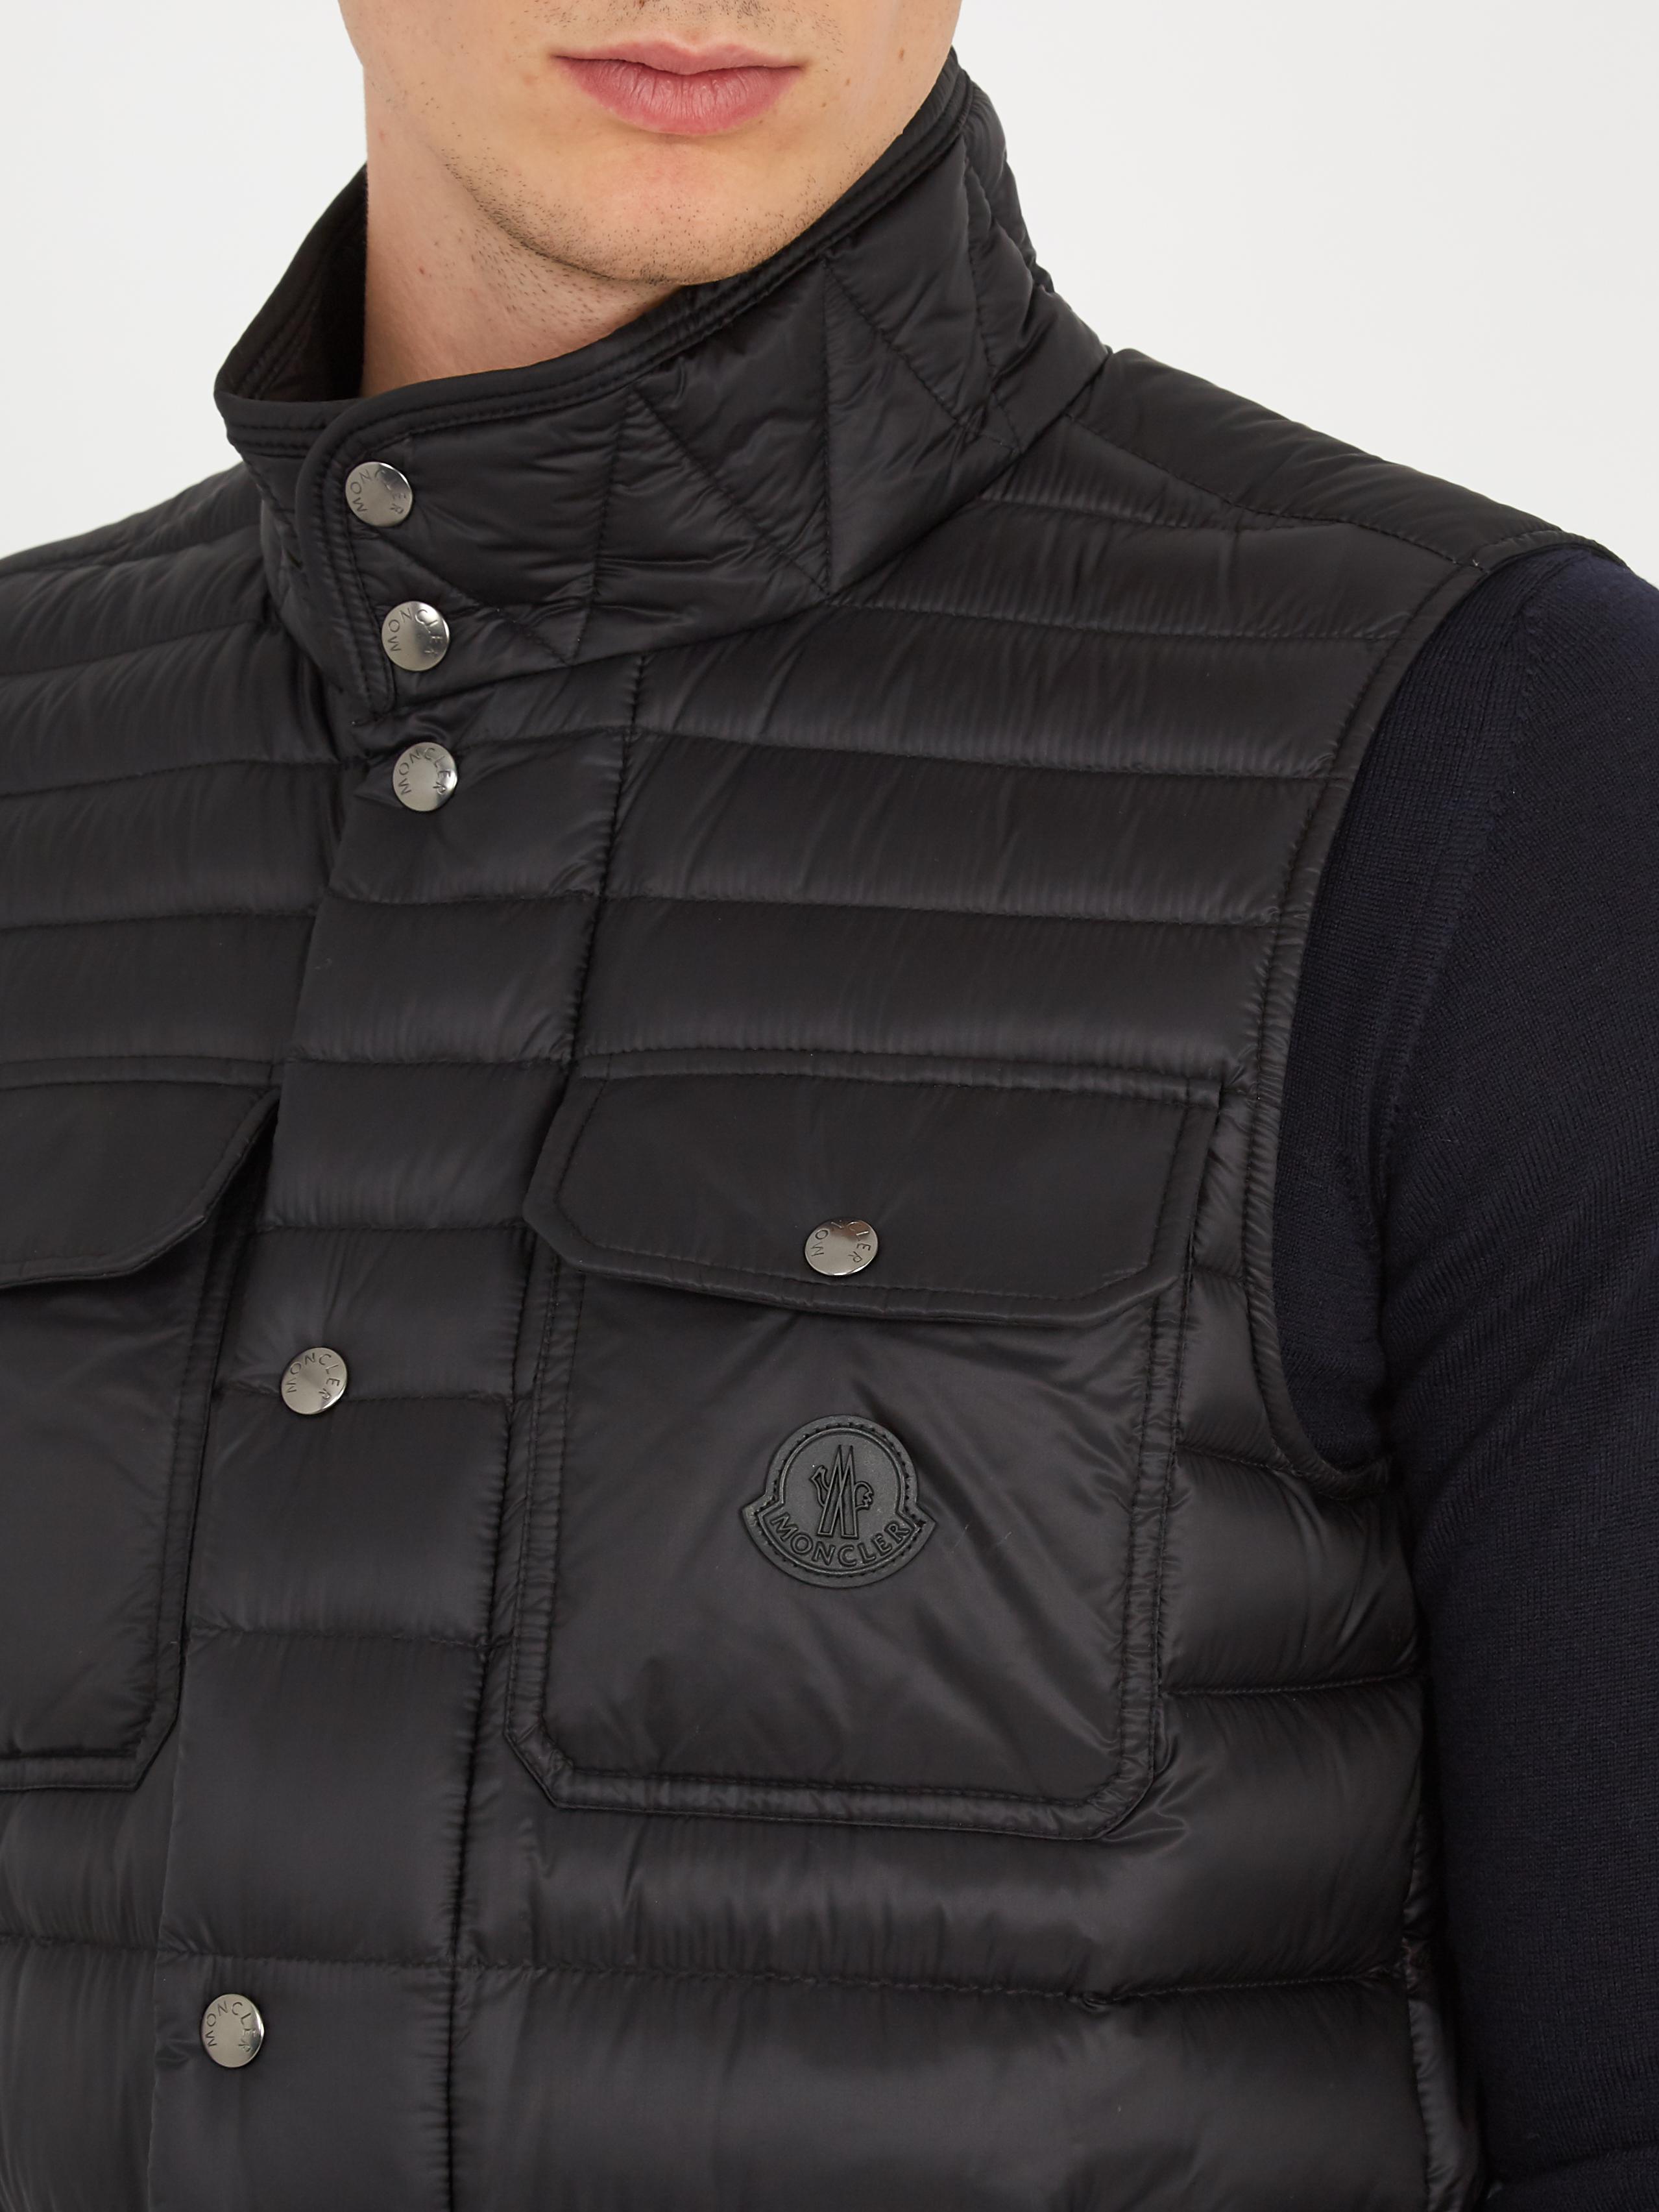 Moncler Synthetic Ever Quilted Down Gilet in Black for Men - Lyst